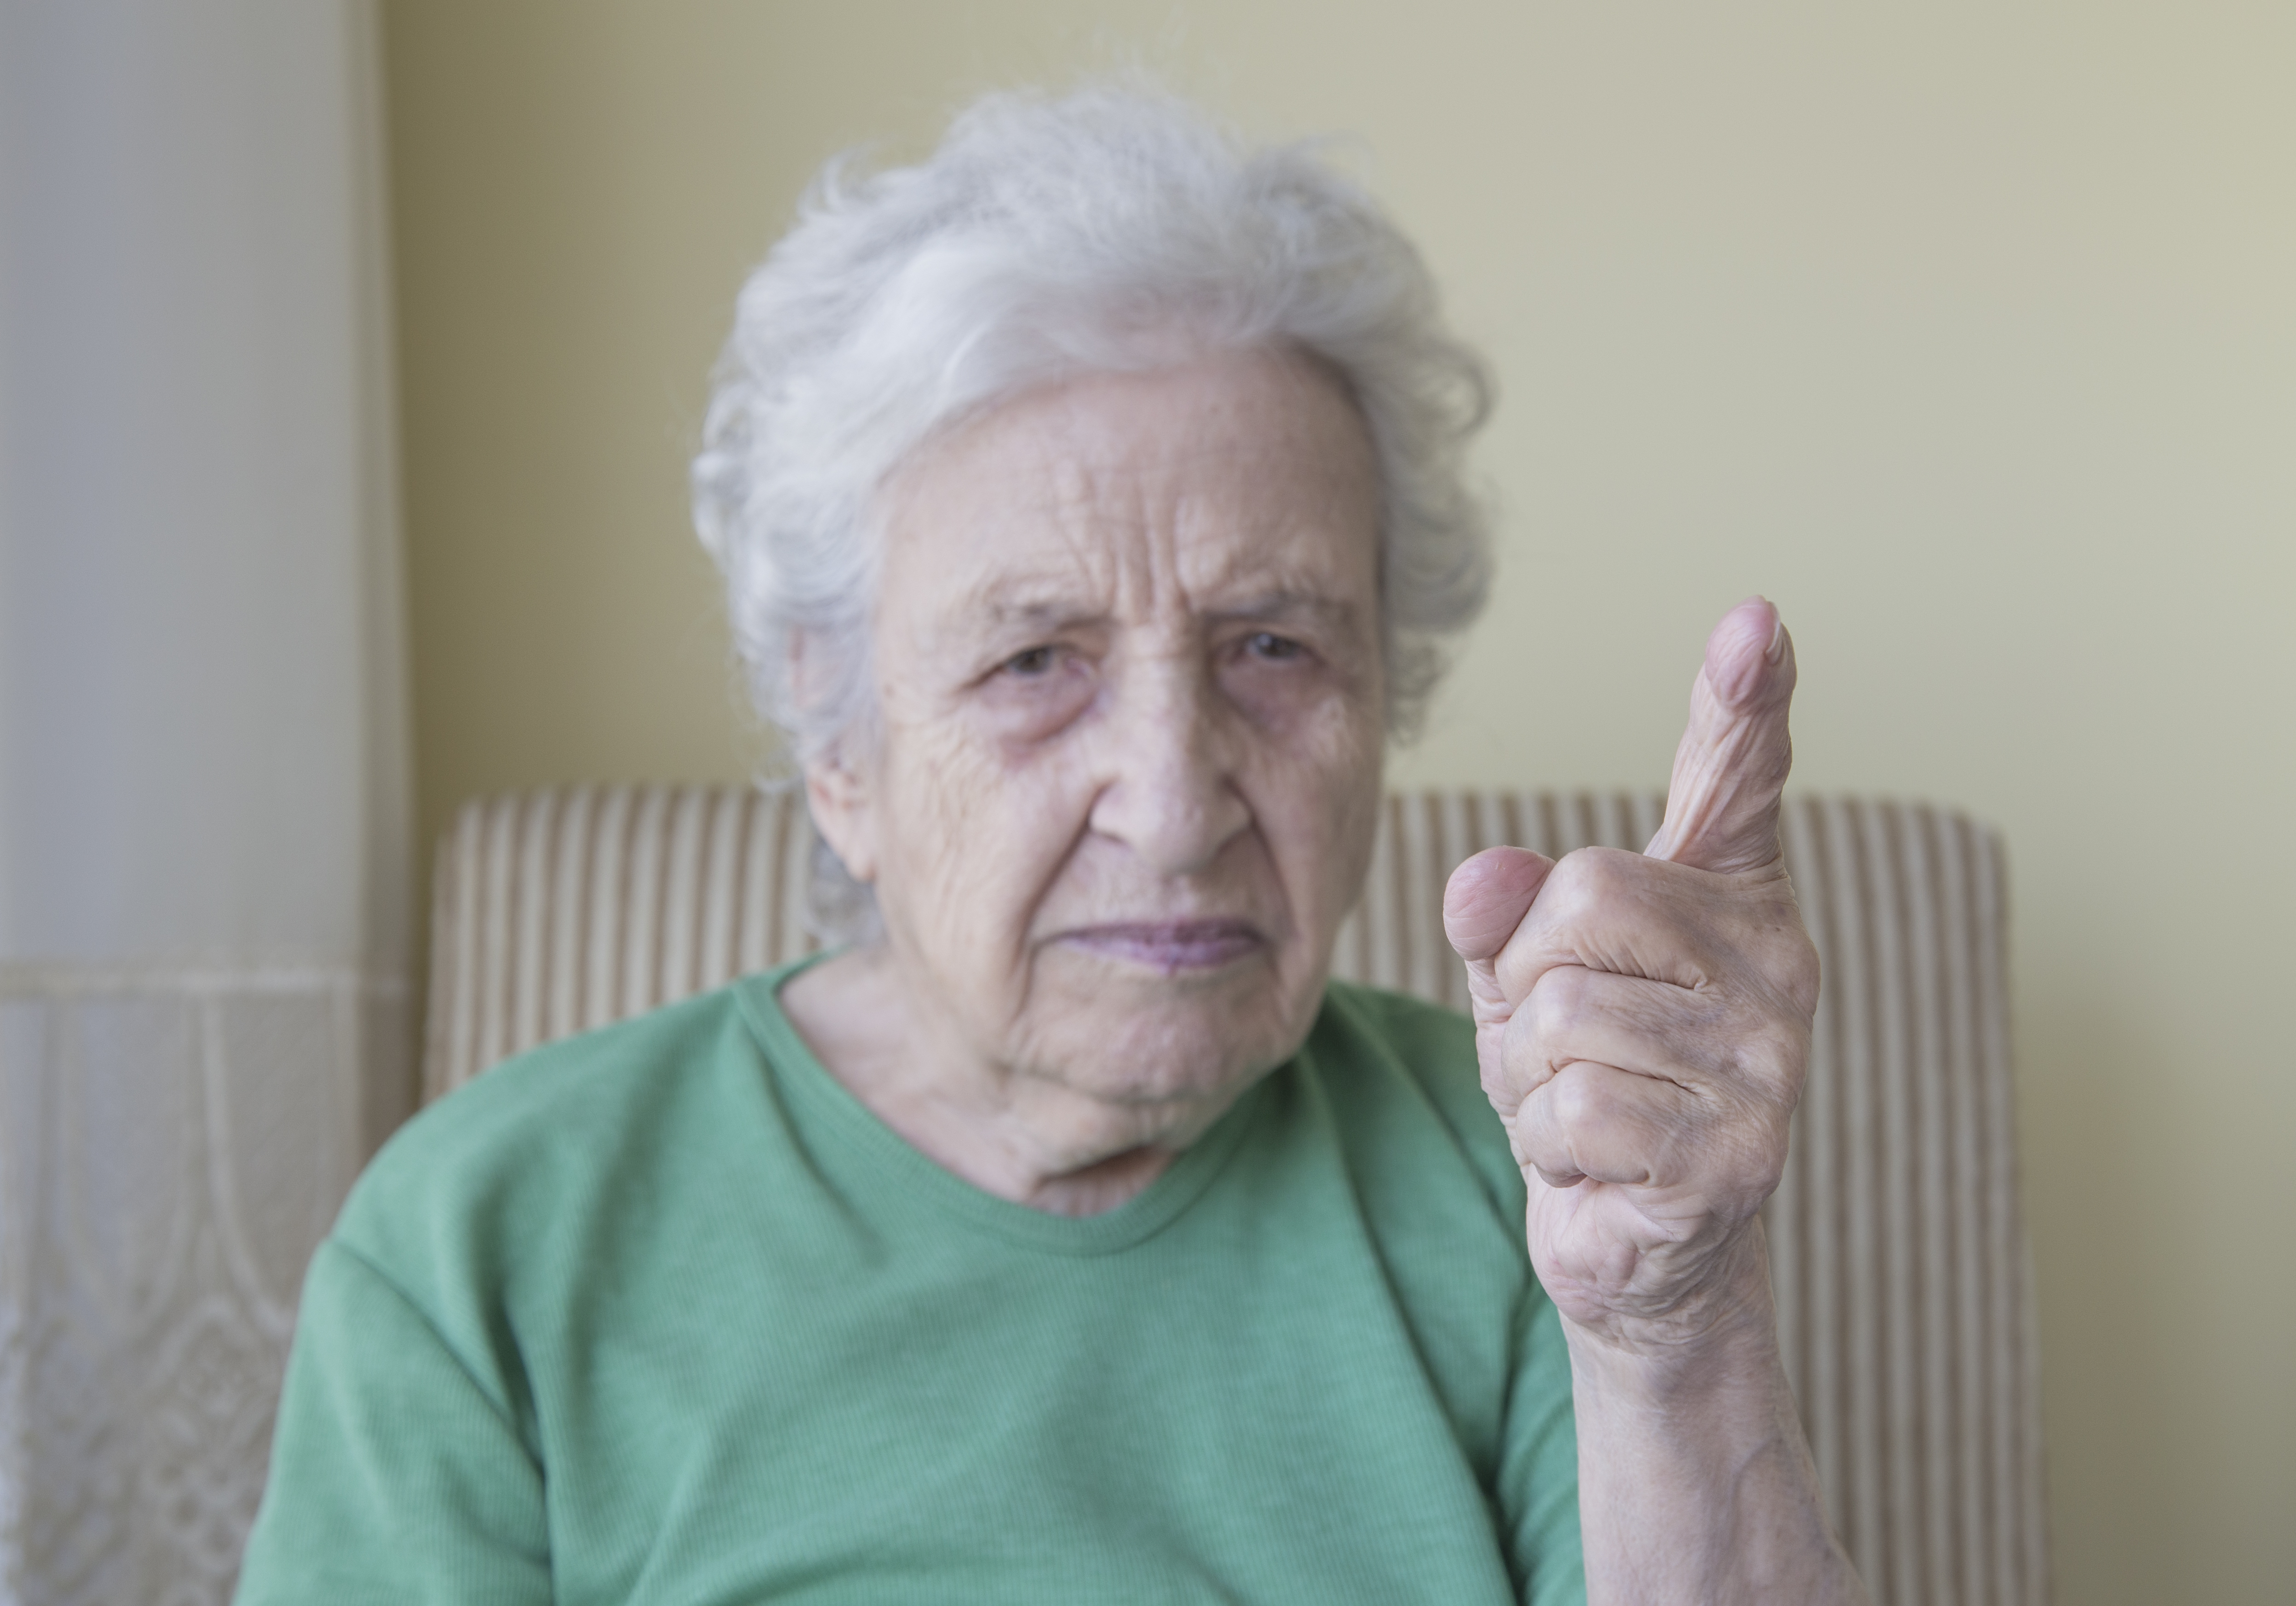 A woman found her grandmother mean and hurtful. | Source: Shutterstock